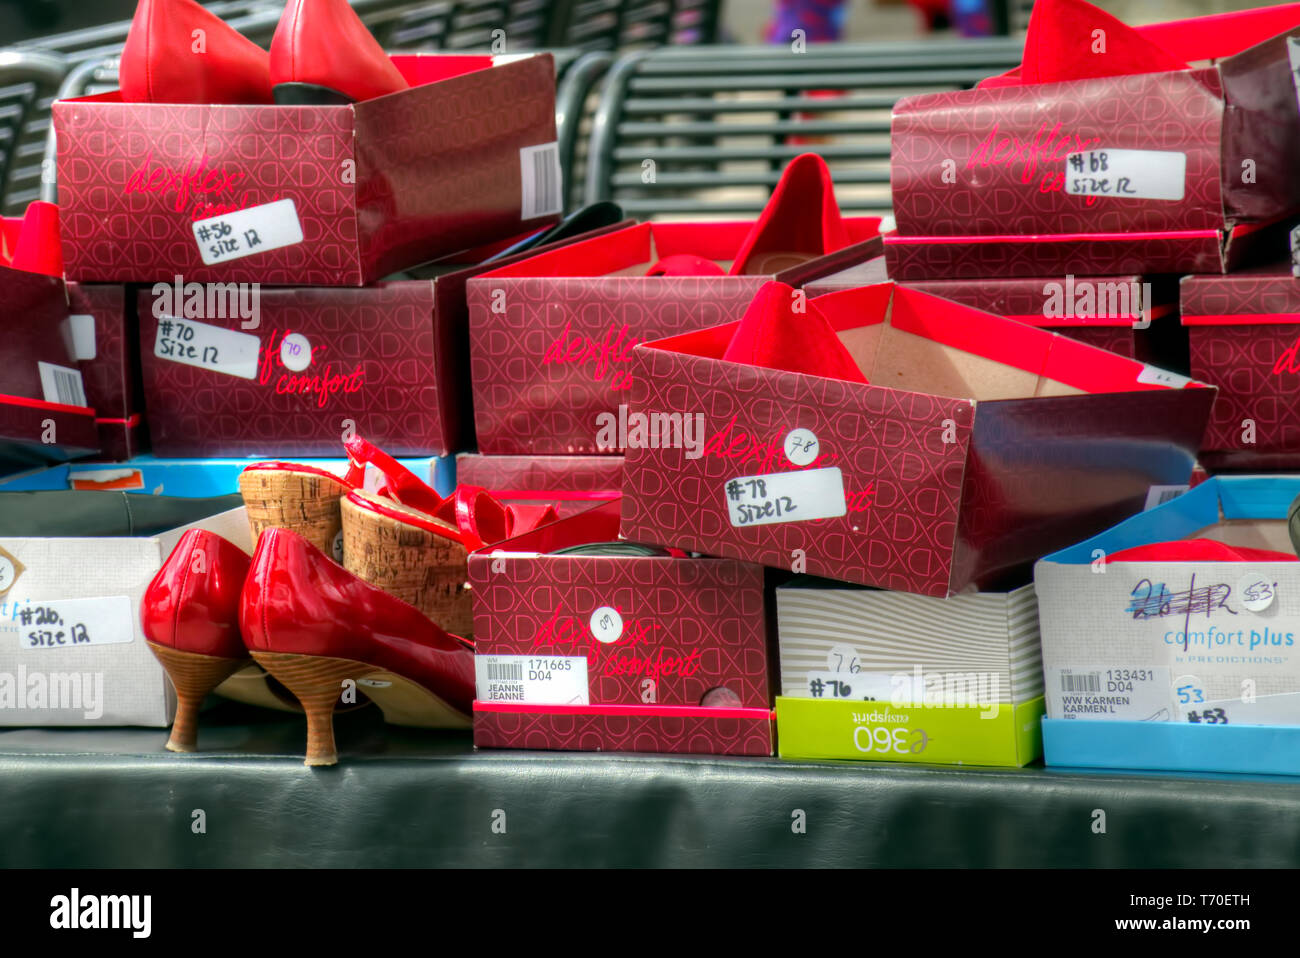 Boxes of red high heels to be worn by men supporting a Walk a Mile in Her Shoes campaign to raise awareness for gender equality. Stock Photo